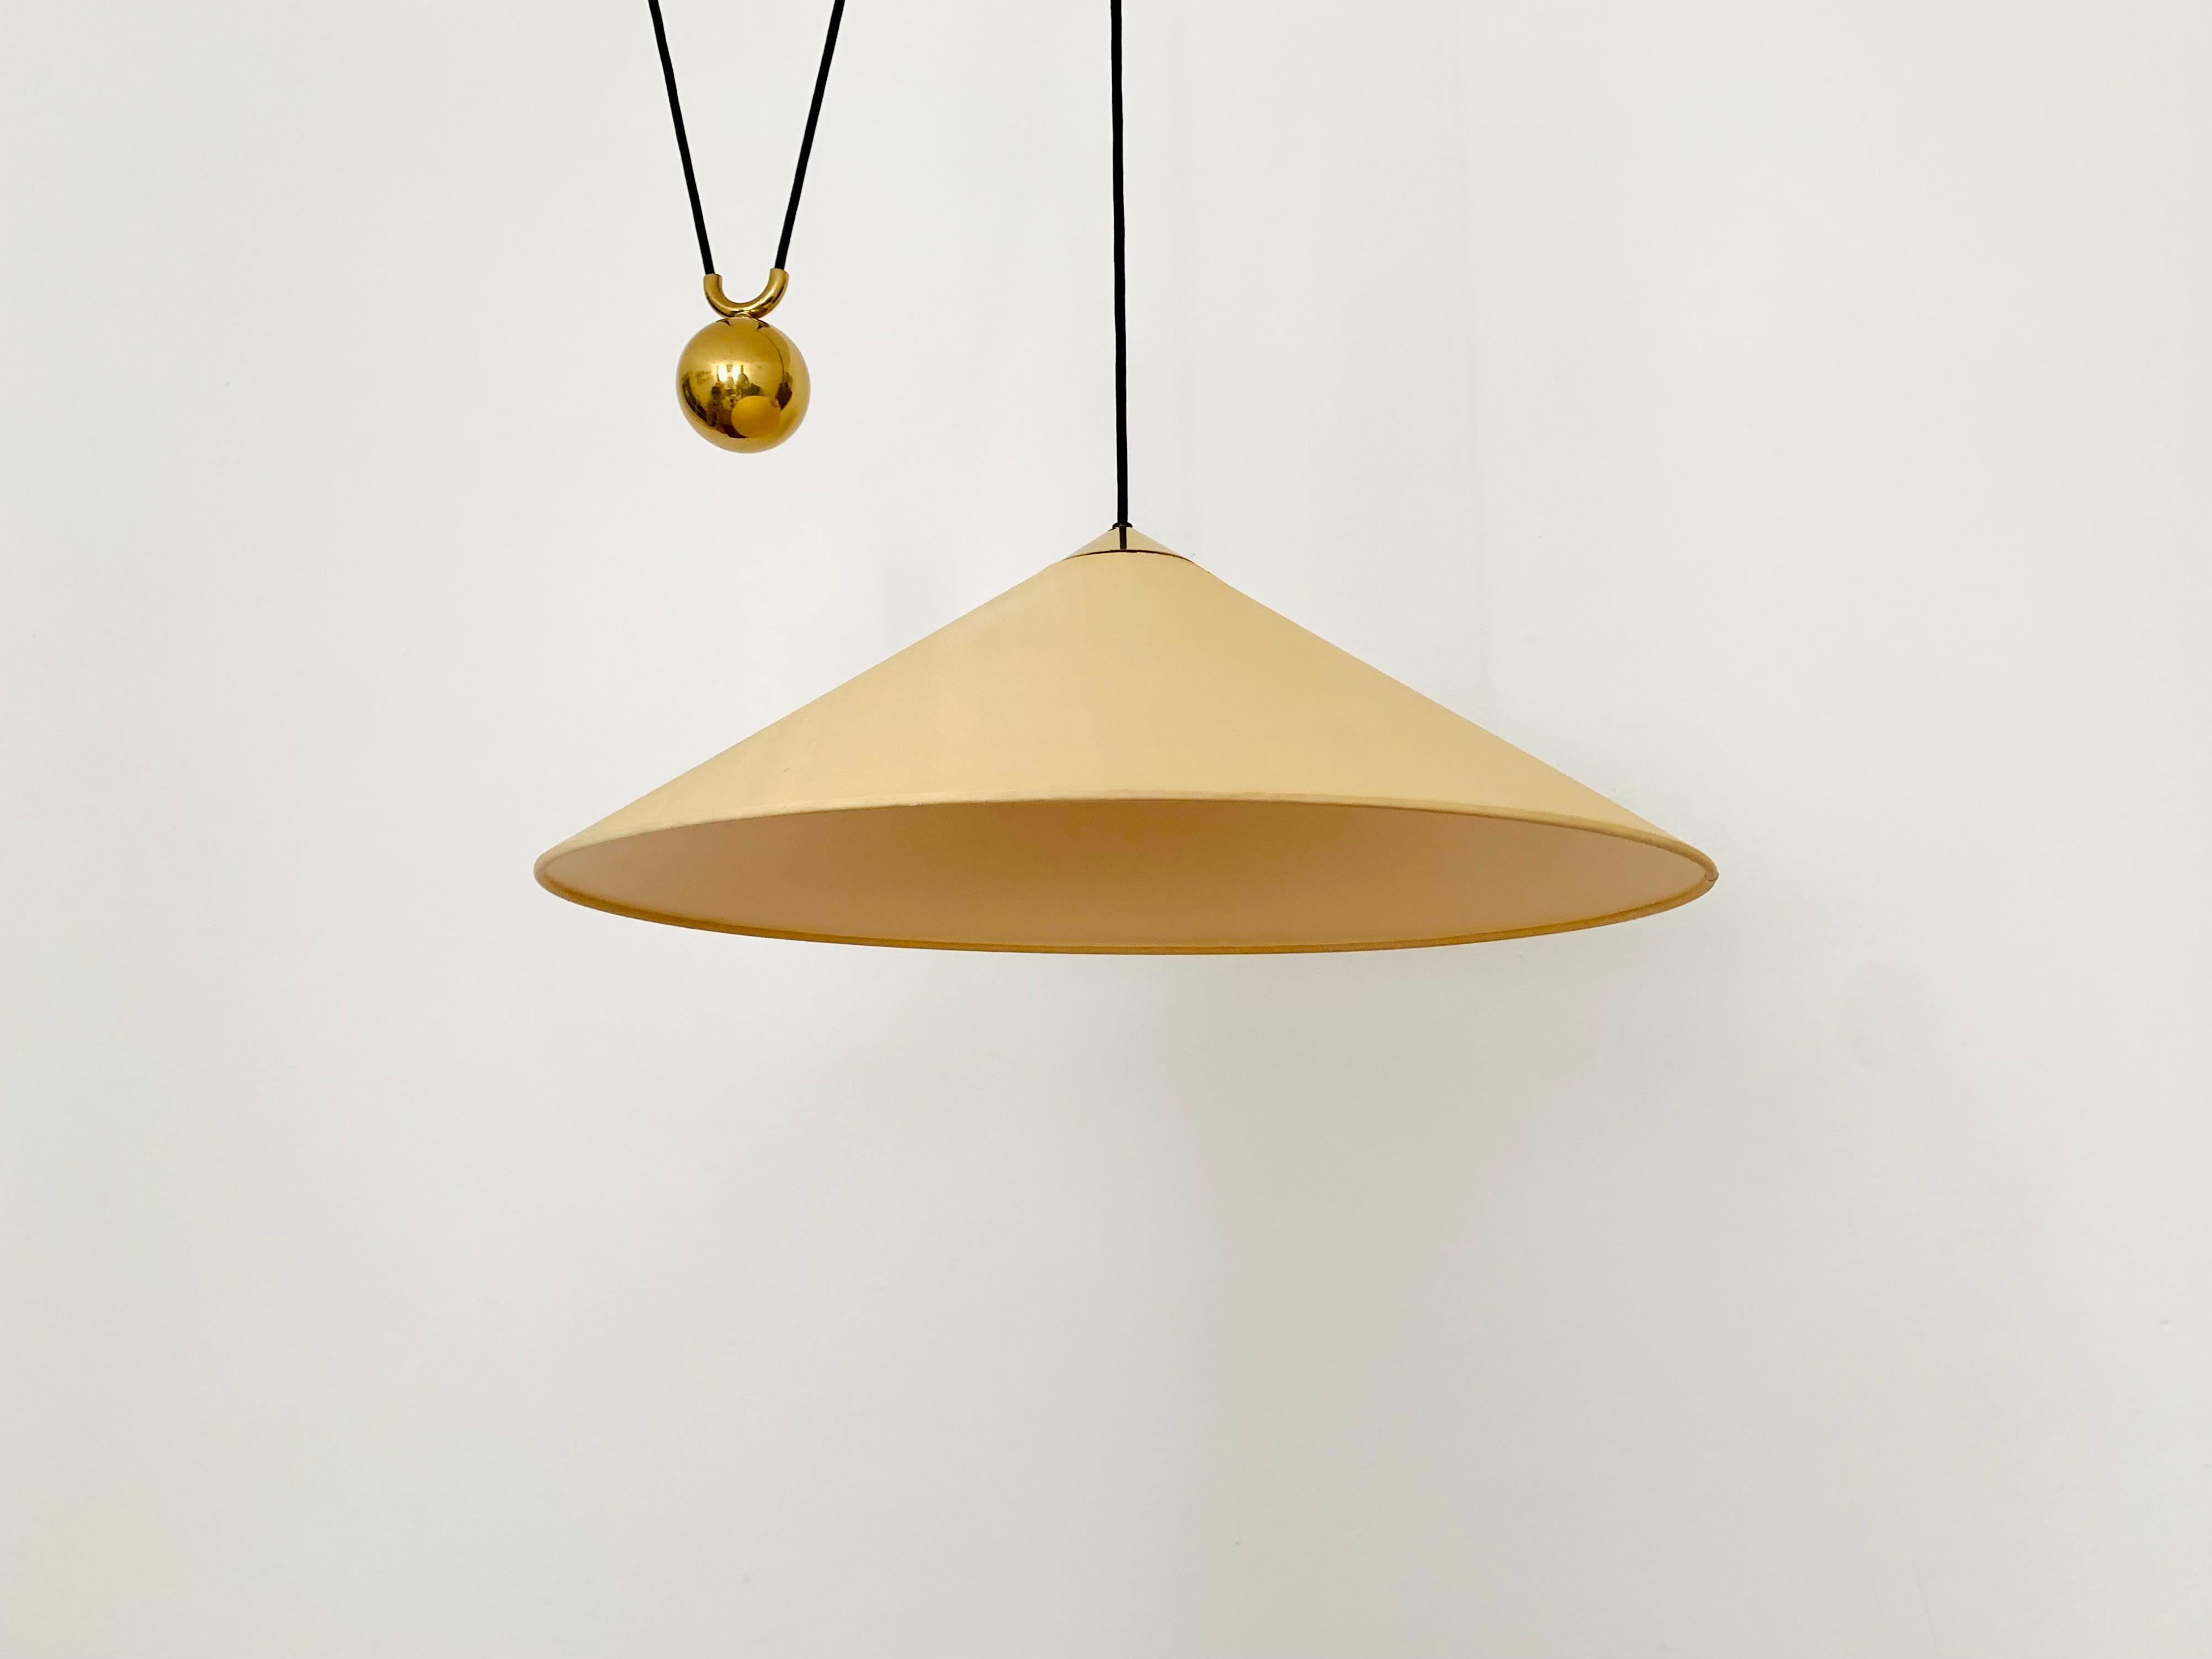 Adjustable Brass Pendant Lamp with Counterweight by Florian Schulz In Good Condition For Sale In München, DE